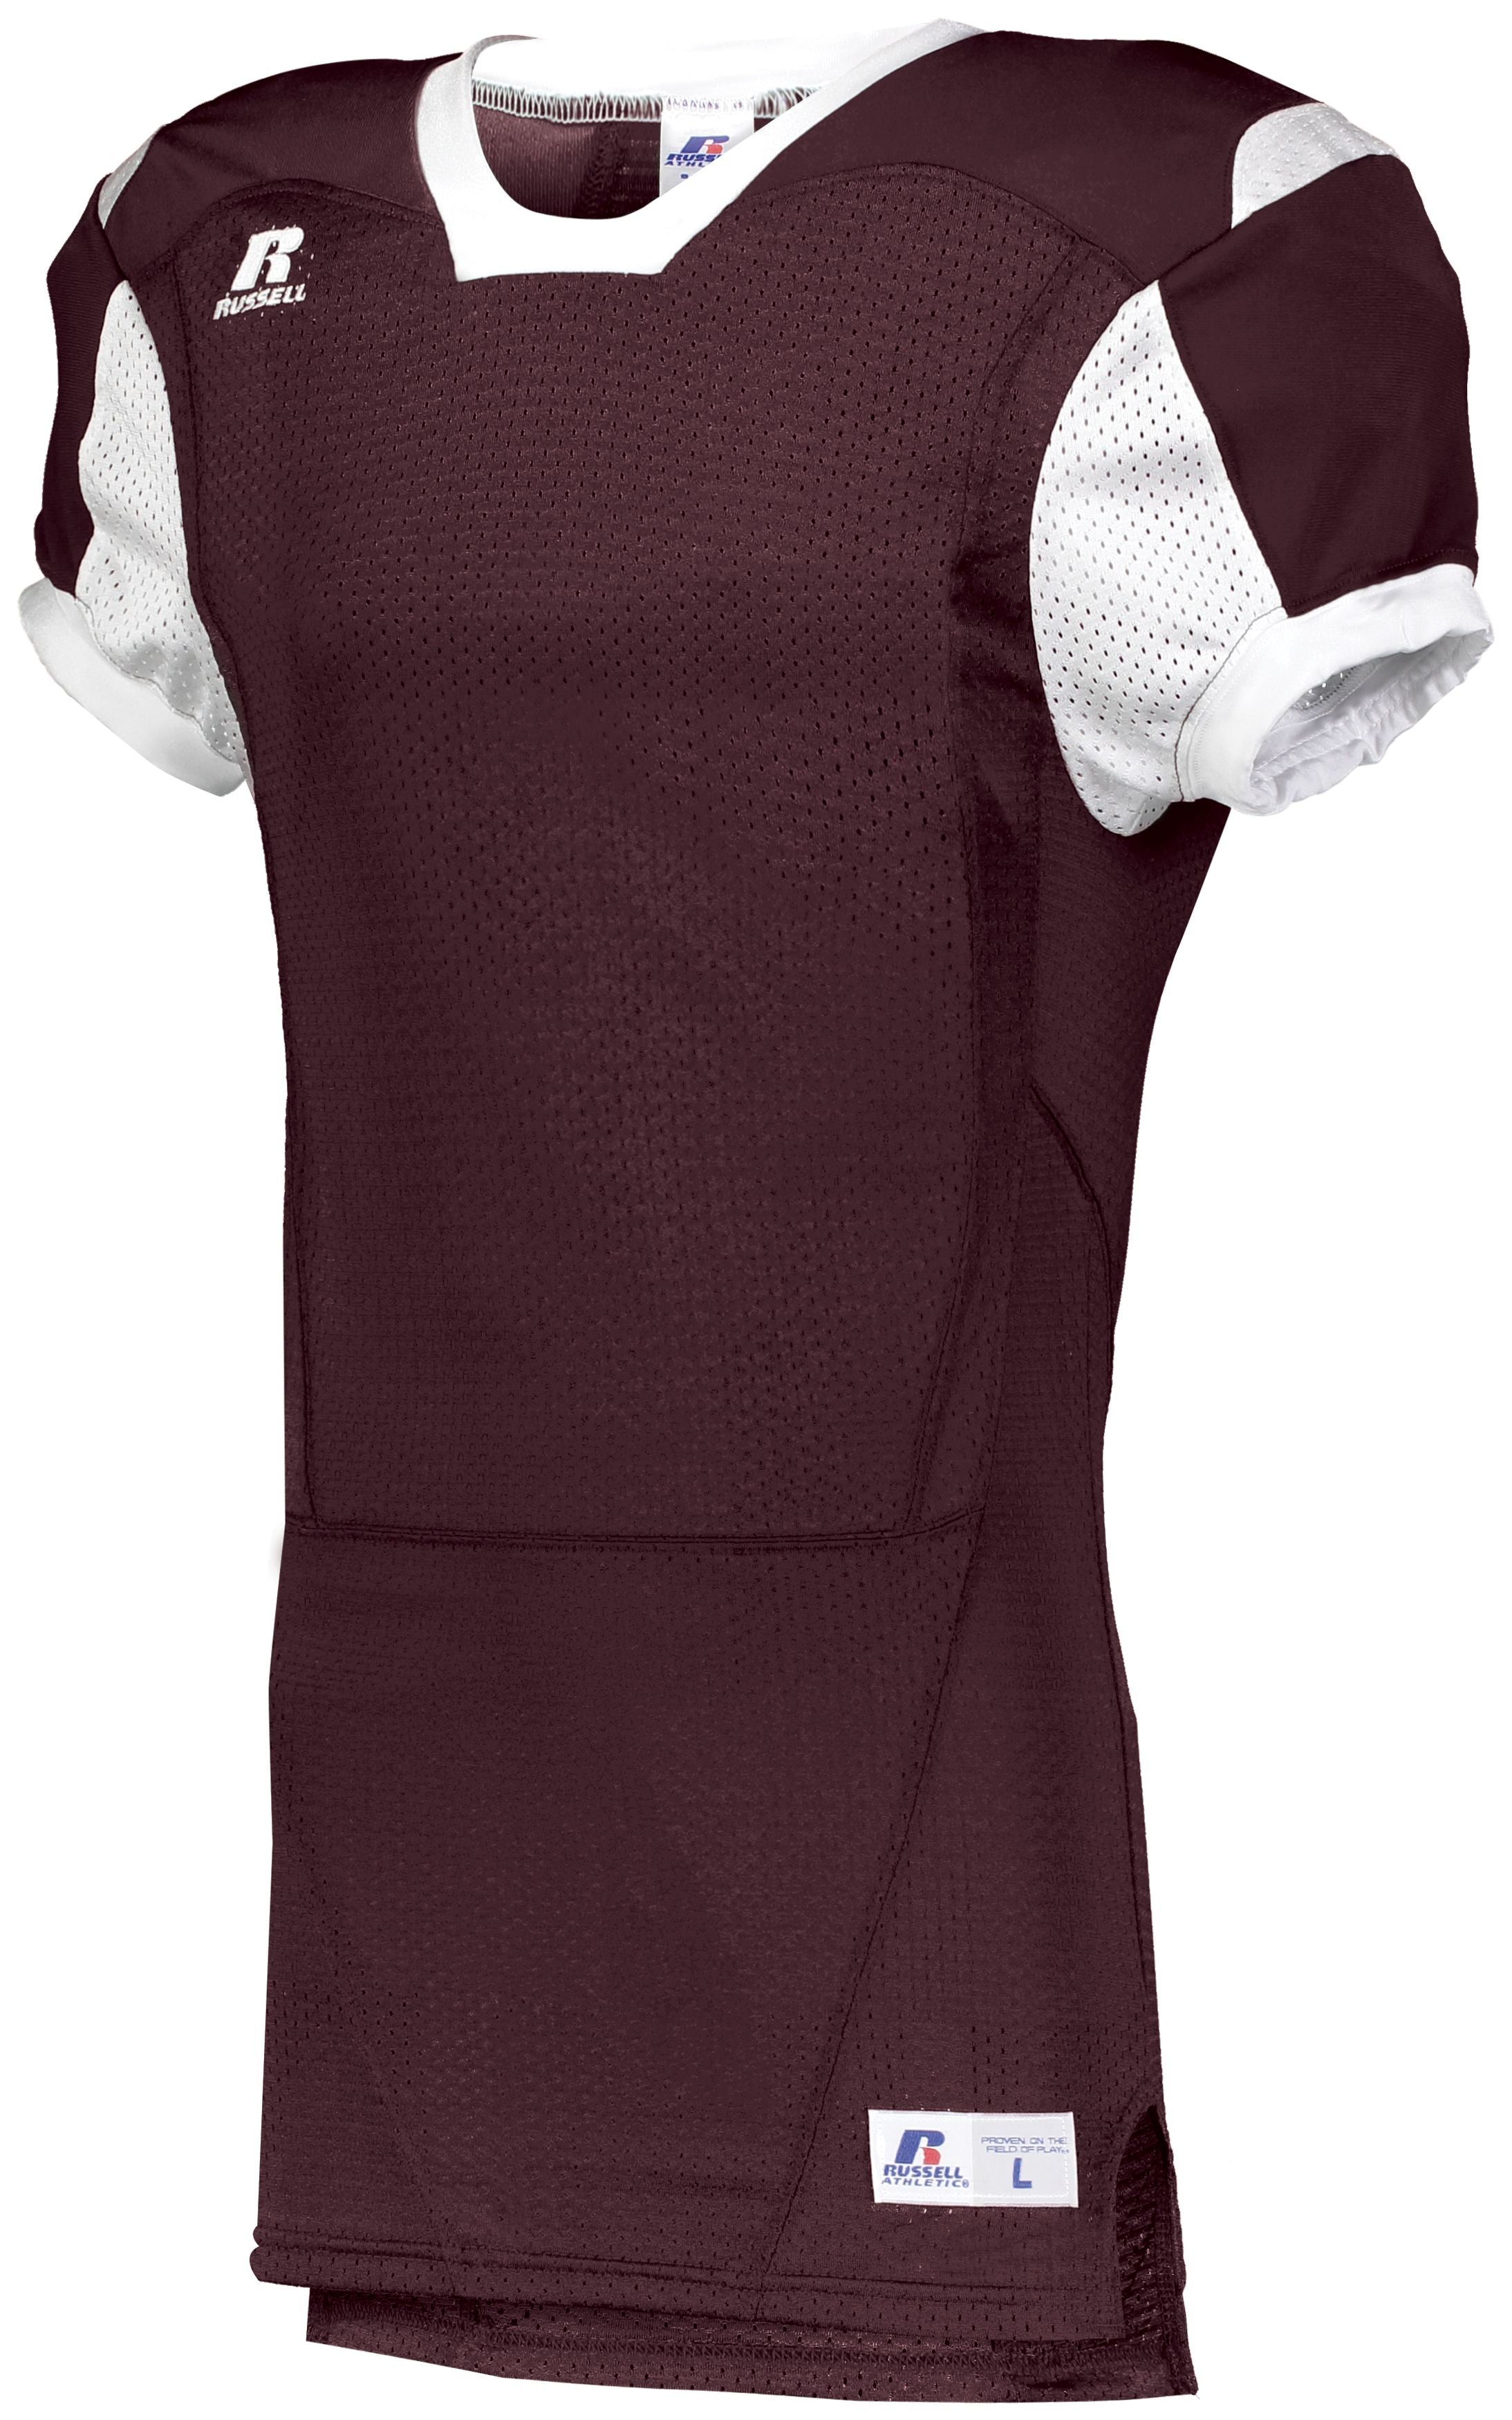 Russell Athletic Youth Color Block Game Jersey in Maroon/White  -Part of the Youth, Youth-Jersey, Football, Russell-Athletic-Products, Shirts, All-Sports, All-Sports-1 product lines at KanaleyCreations.com